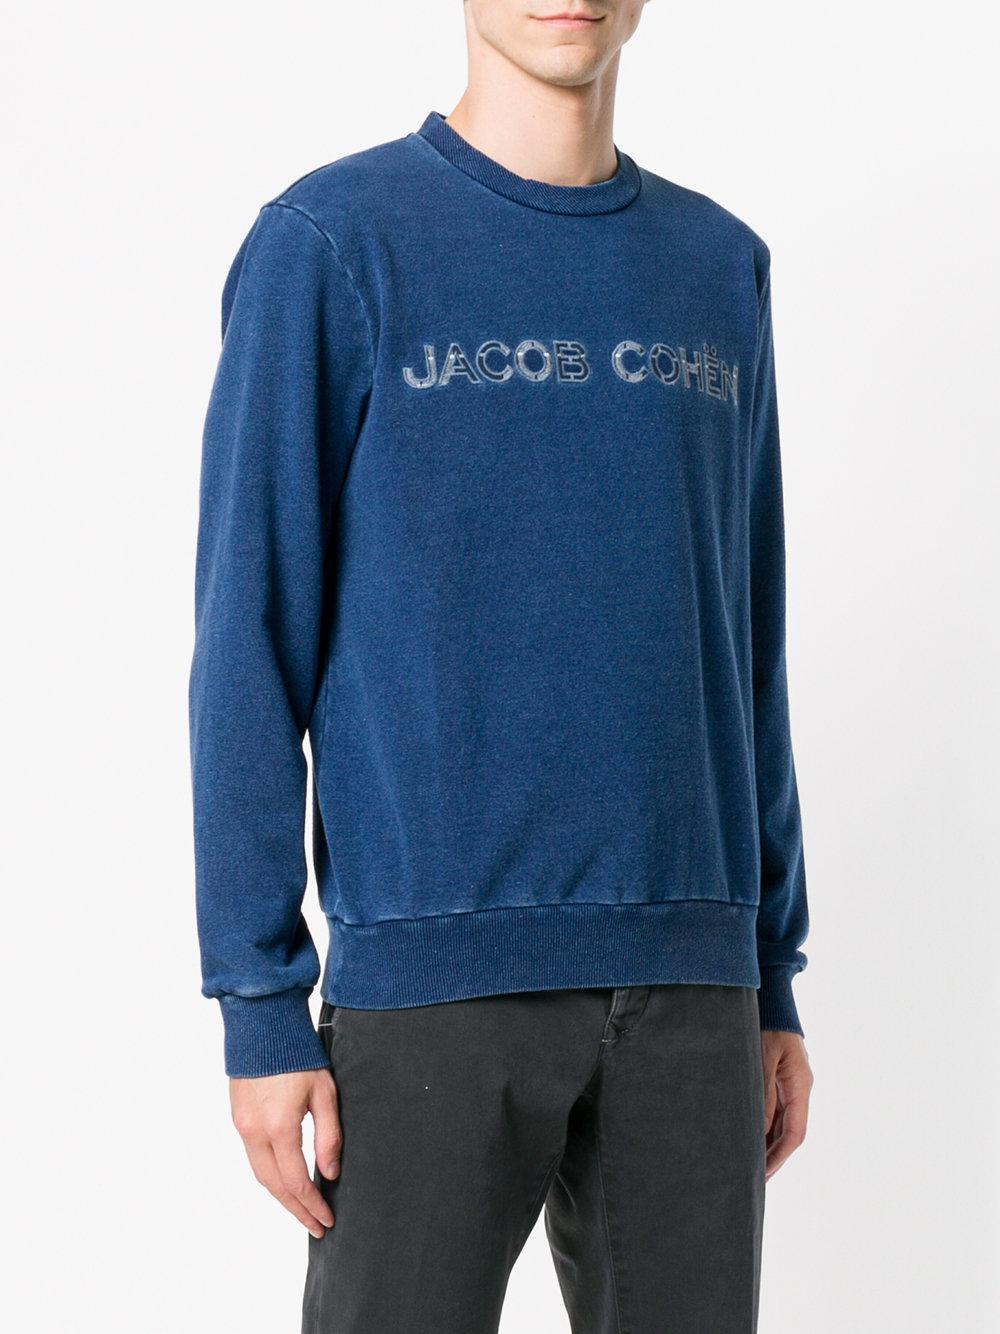 Jacob Cohen Cotton Logo Embroidered Sweatshirt in Blue for Men - Lyst